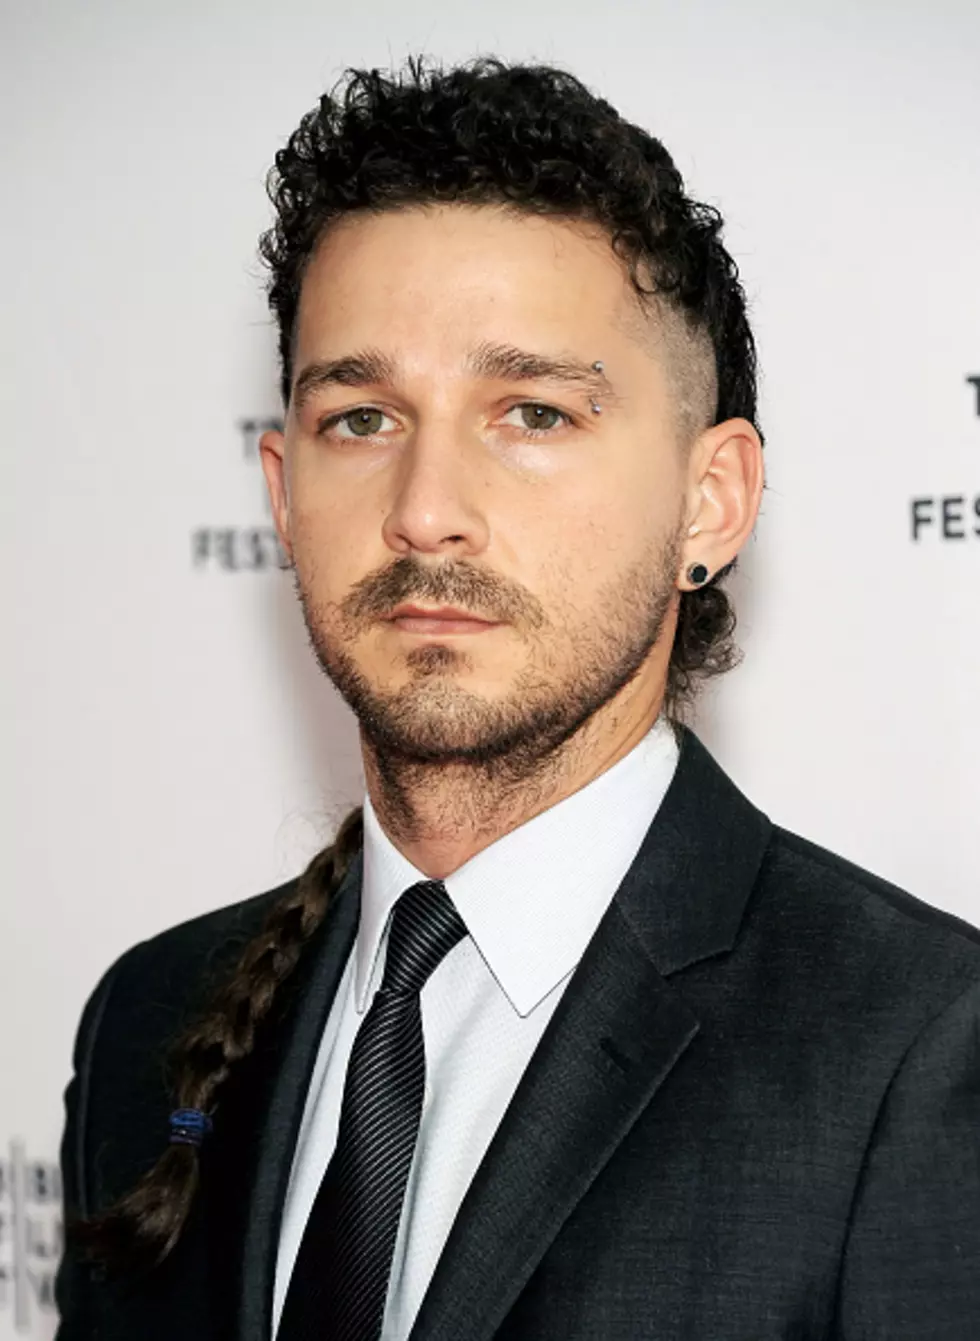 Shia LaBeouf Gets in Heated Argument with Girlfriend in German [VIDEO]